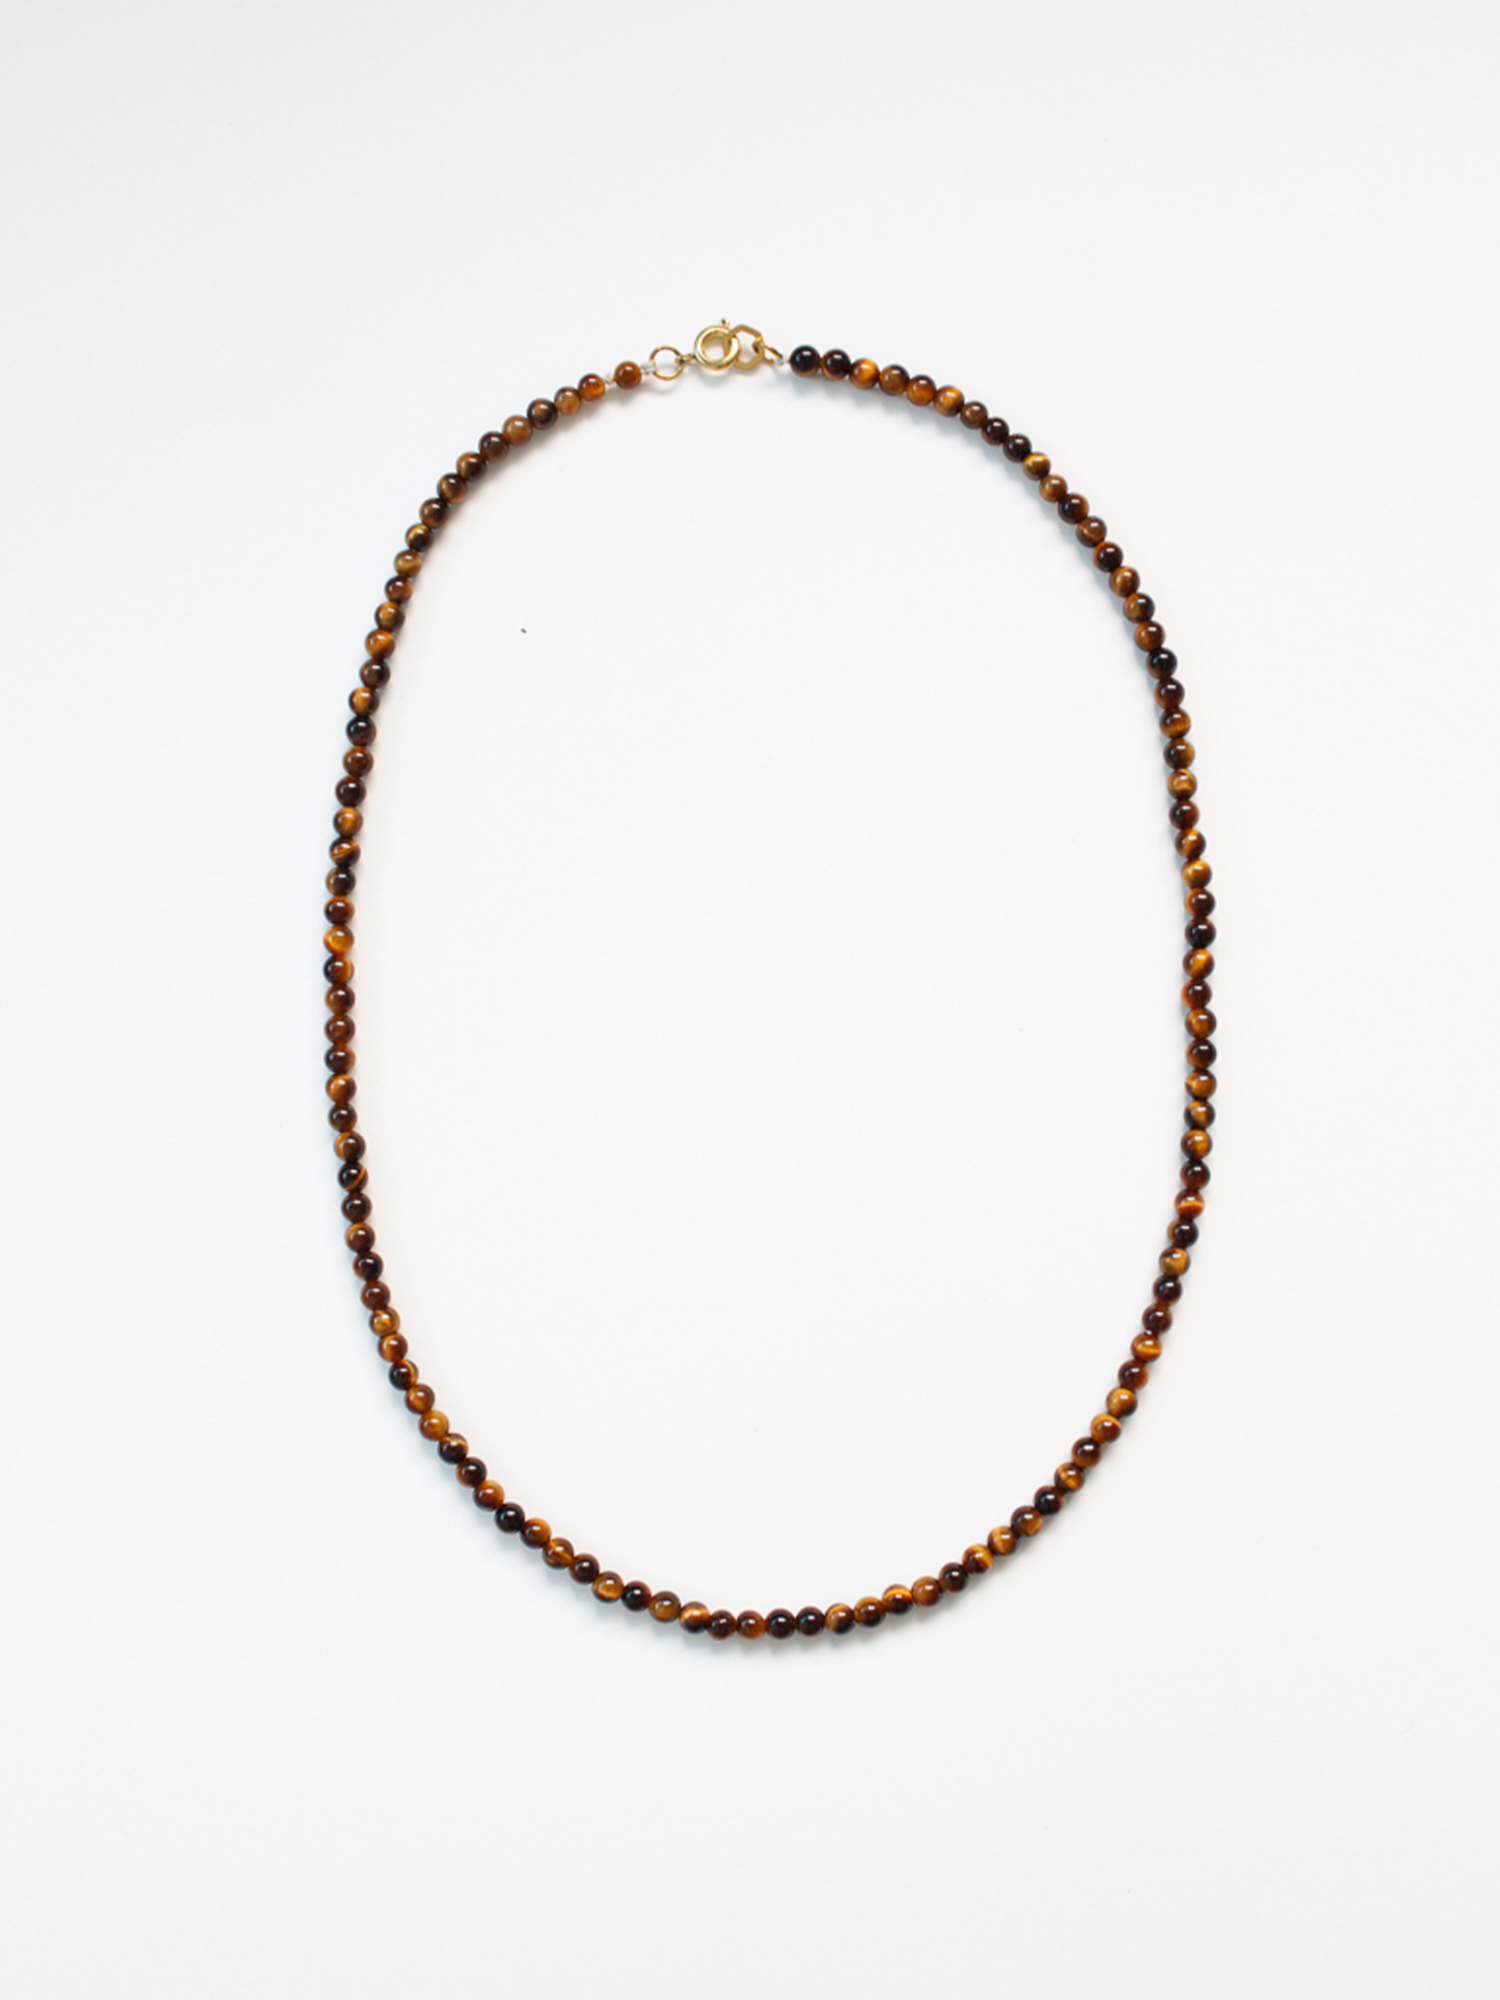 Stone Necklace - Tiger's Eye 4mm